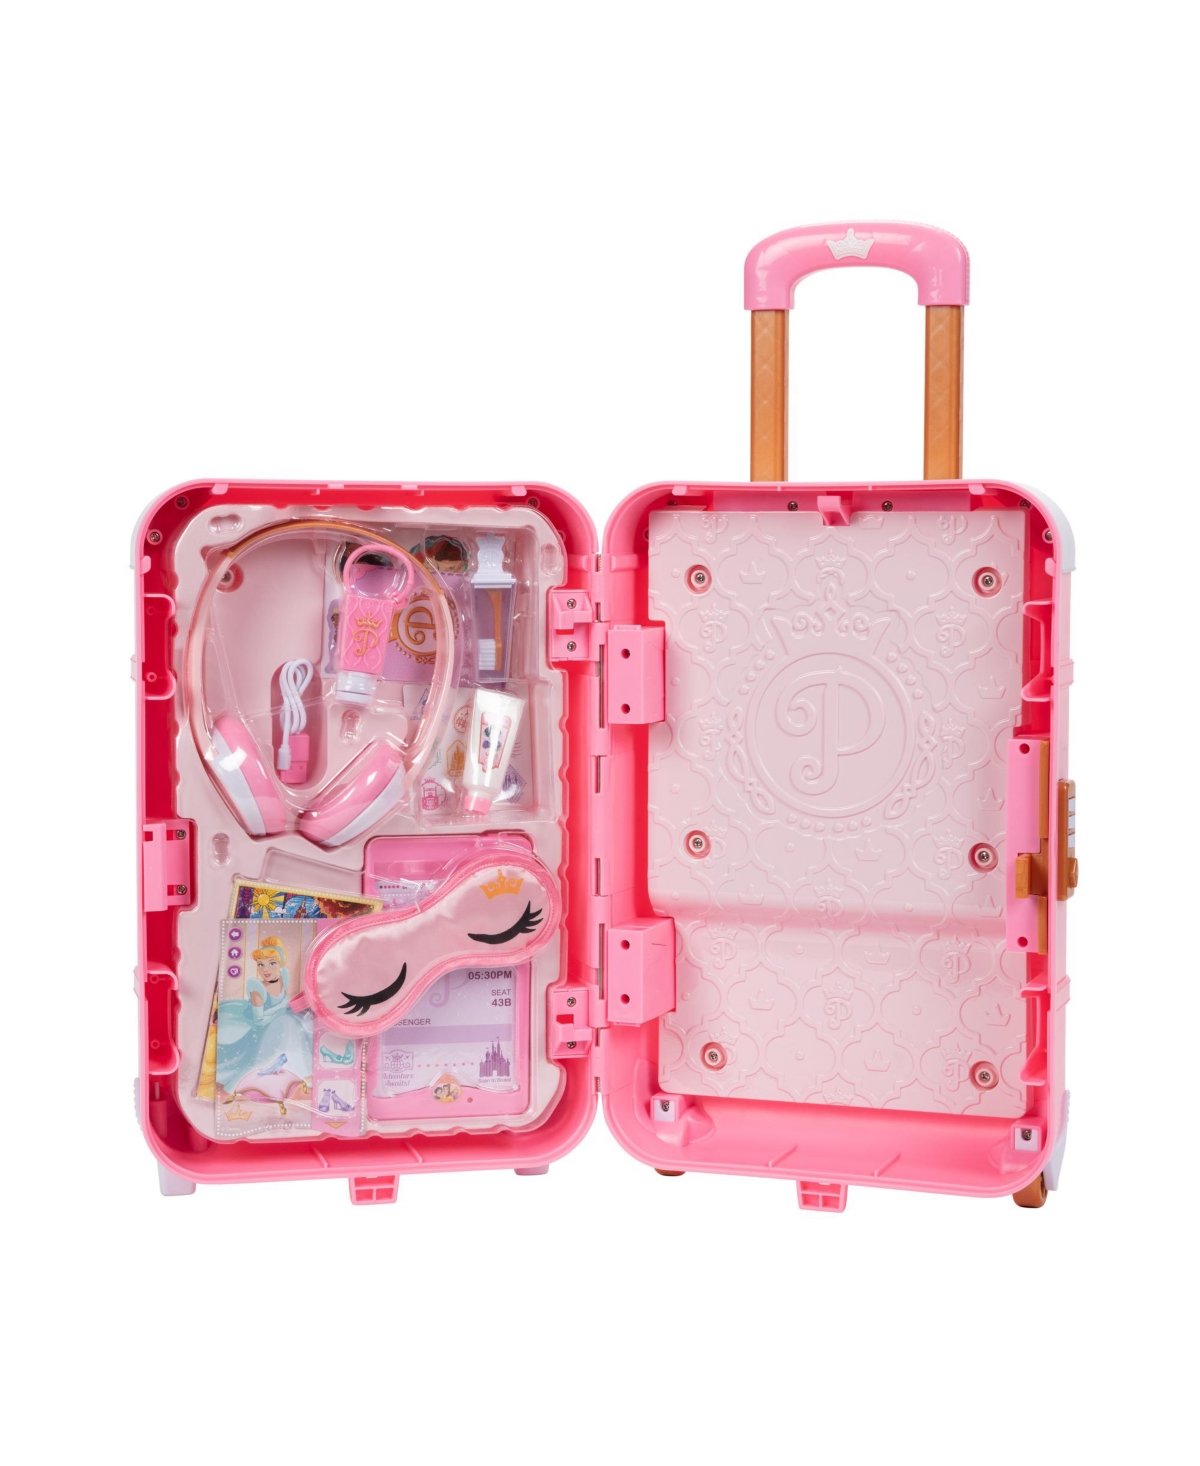 Shop Disney Princess Style Collection World Traveler Play Suitcase In Multicolor